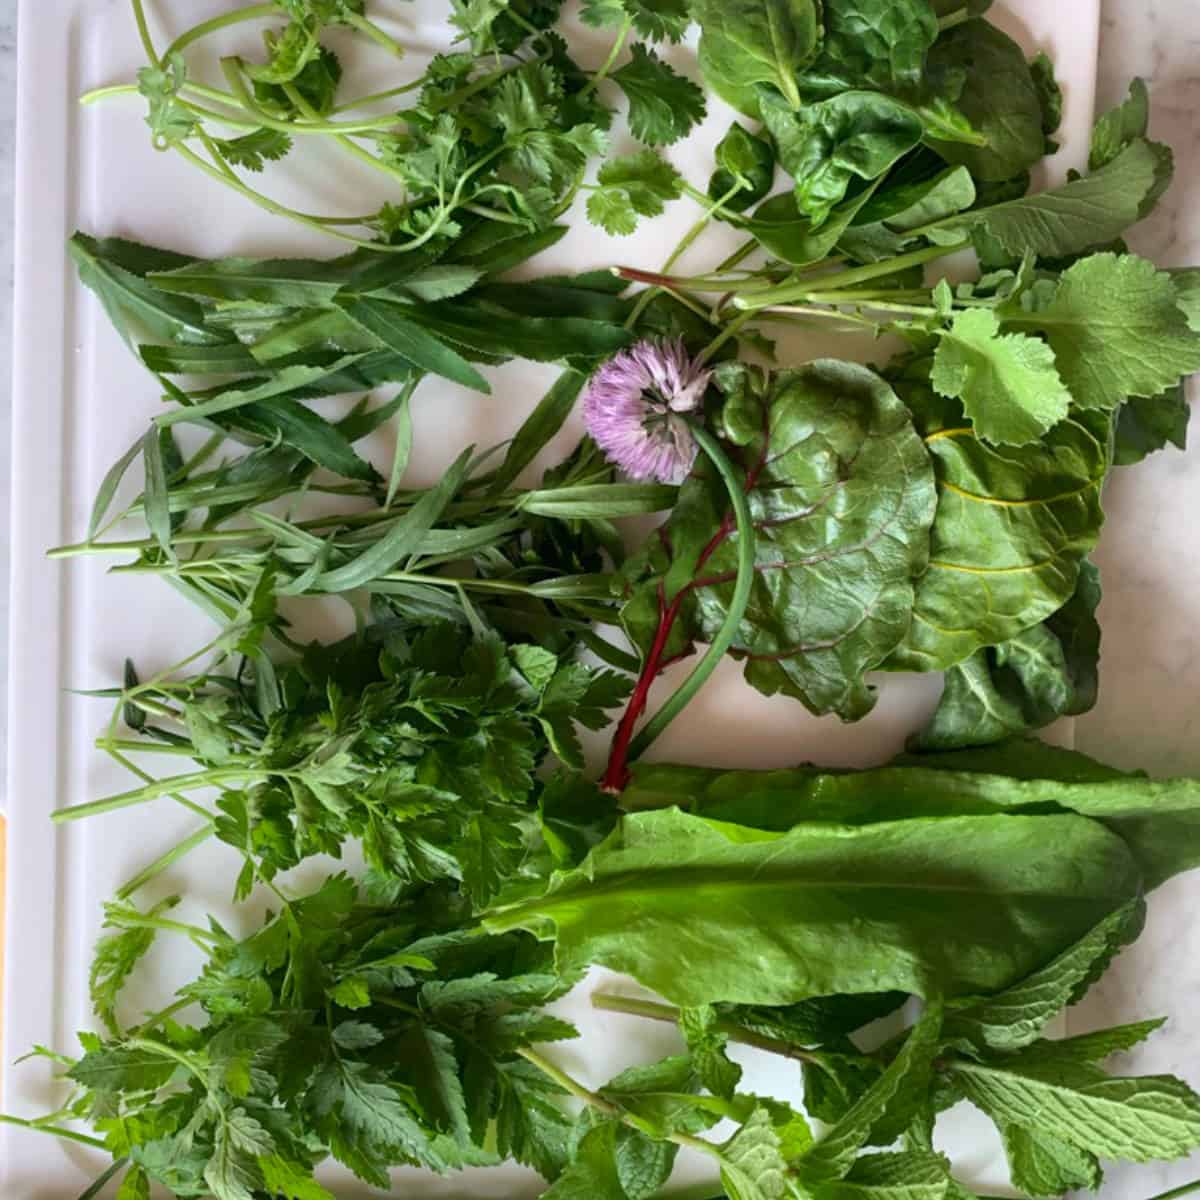 Various greens on a cutting board.